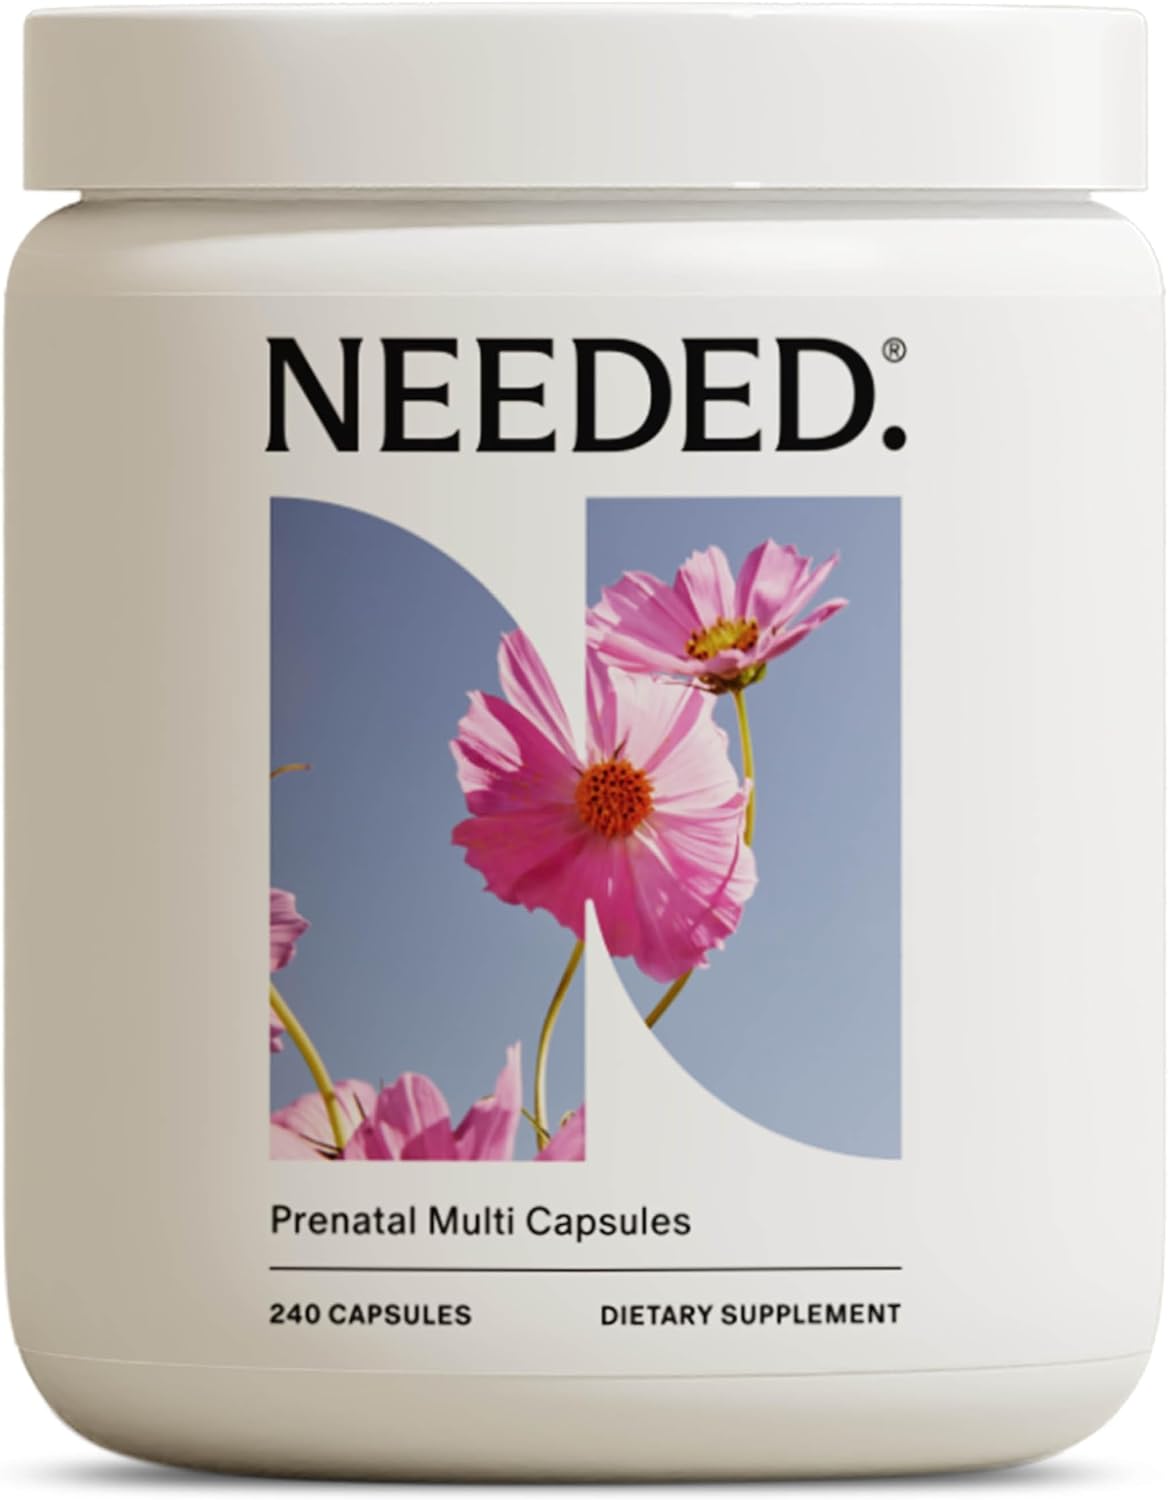 Needed. Multivitamin Capsules for Prenatal, Pregnancy, Breastfeeding, Postpartum | Expertly-Formulated & Third-Party Tested| 30-Day Supply